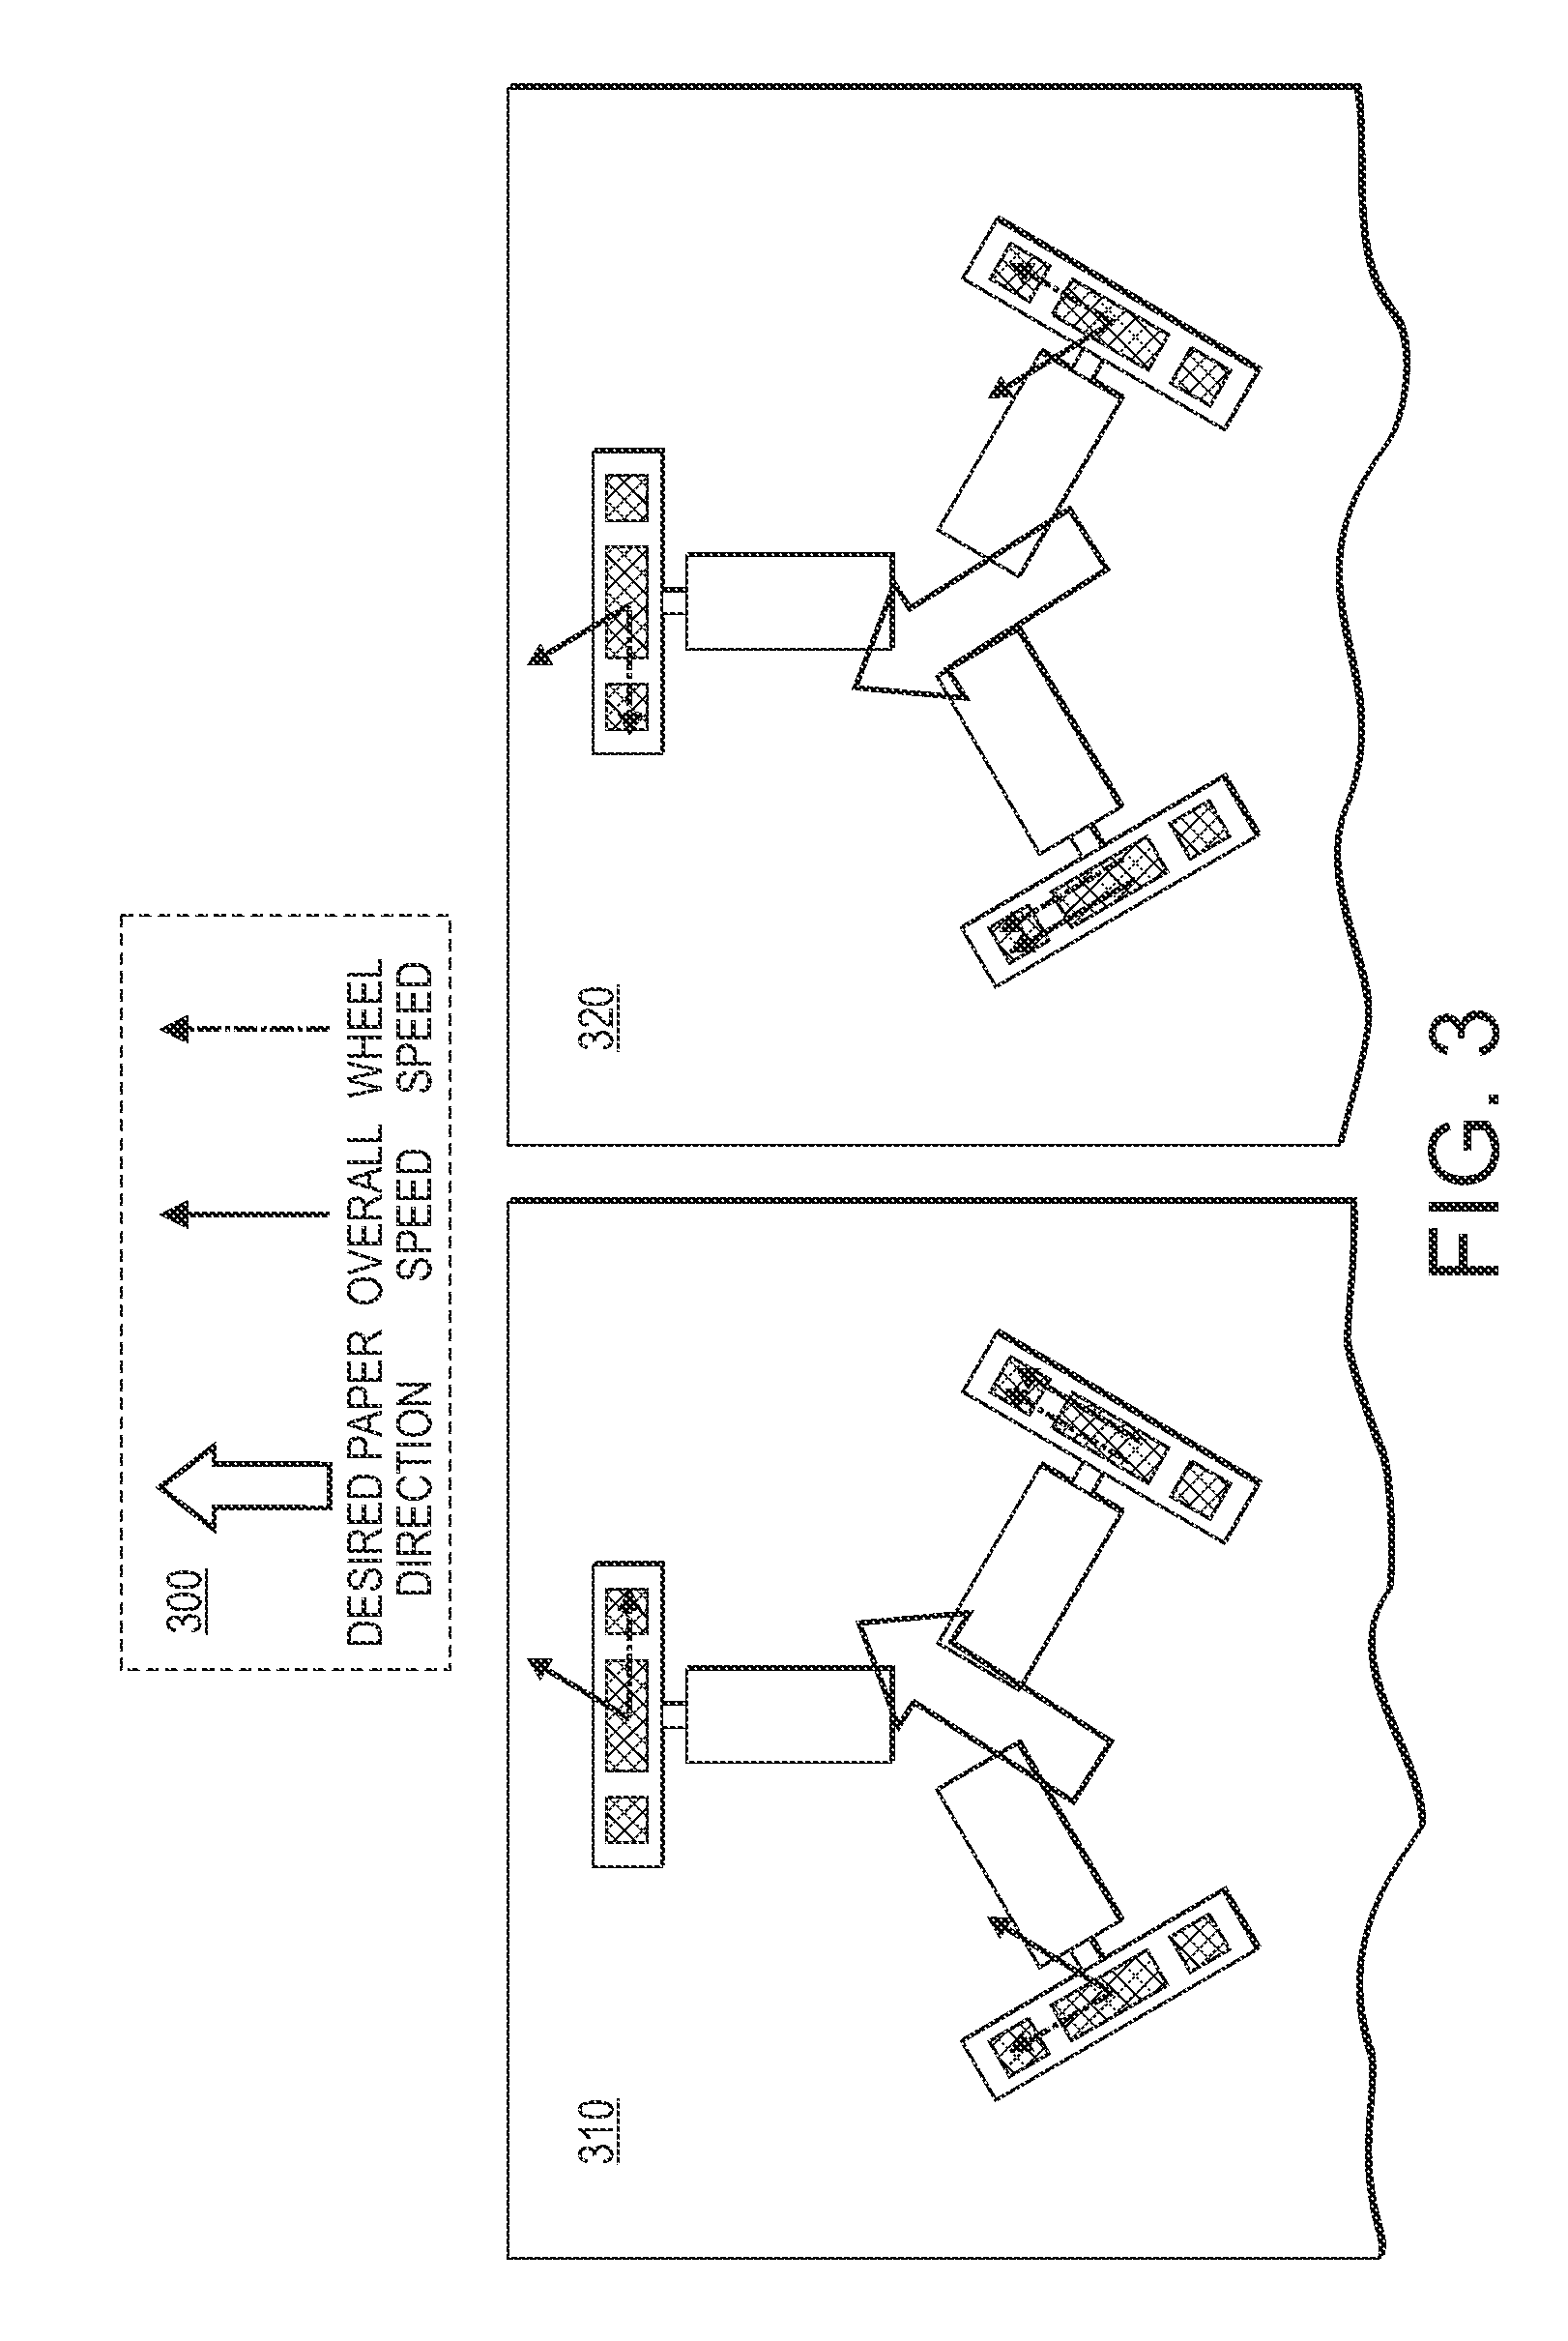 Systems and methods for implementing unique offsetting stacker registration using omni-directional wheels for set compiling in image forming devices